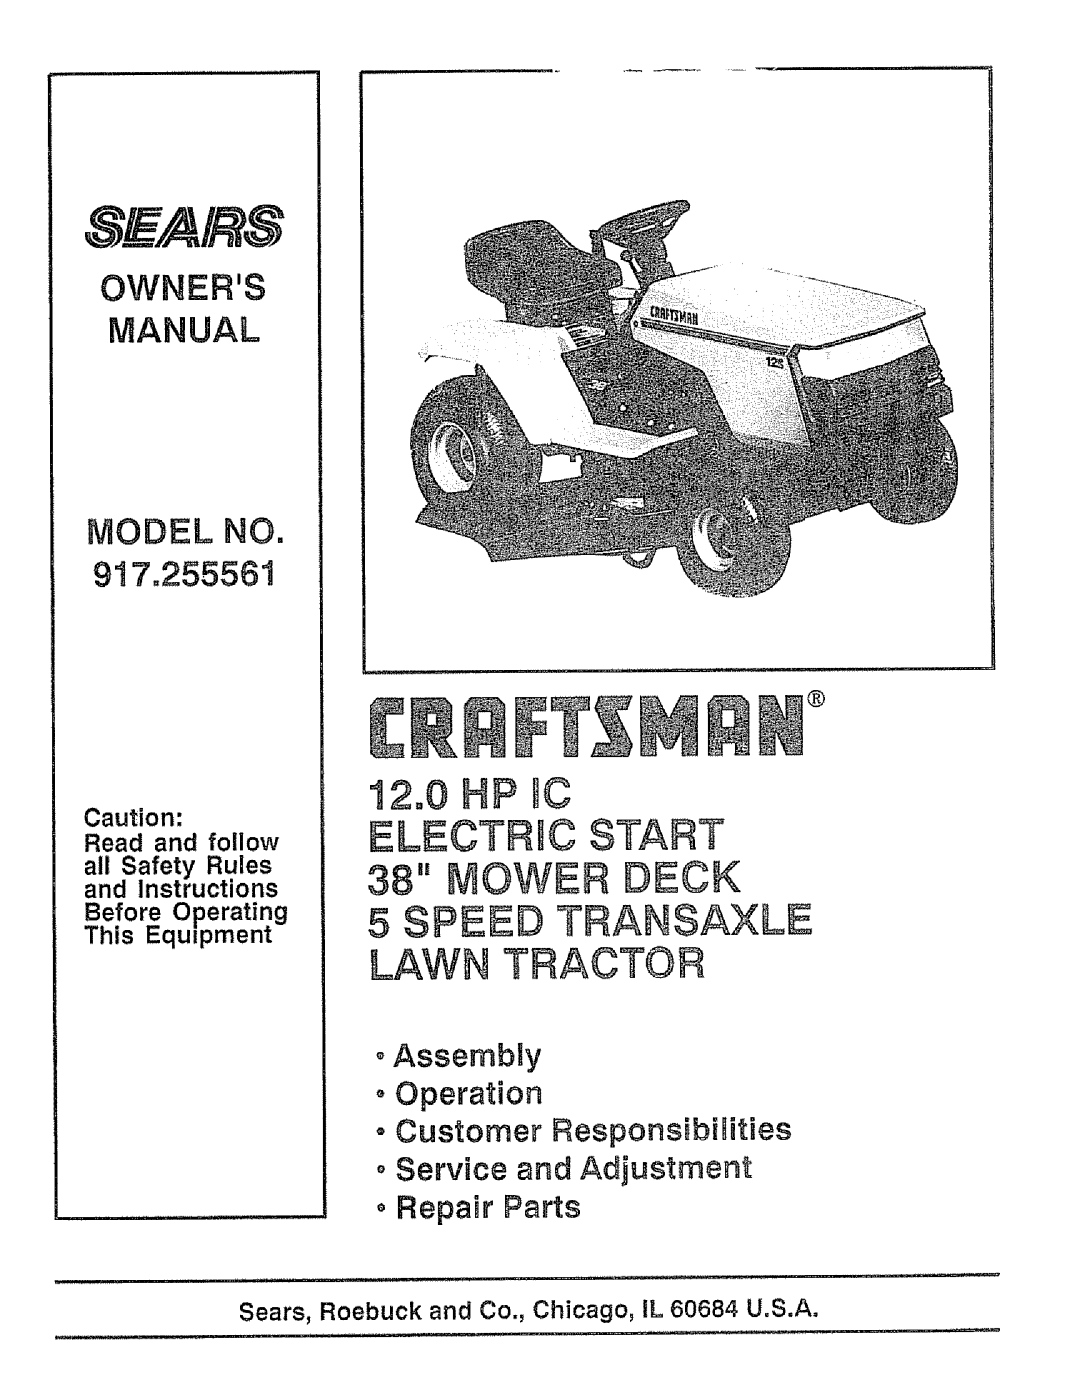 Craftsman 917.255561 owner manual 12o0 HP WC ELECTRIC START 38 MOWER DECK, Spesd Transaxle Lawn Tractor, Owners, Manual 